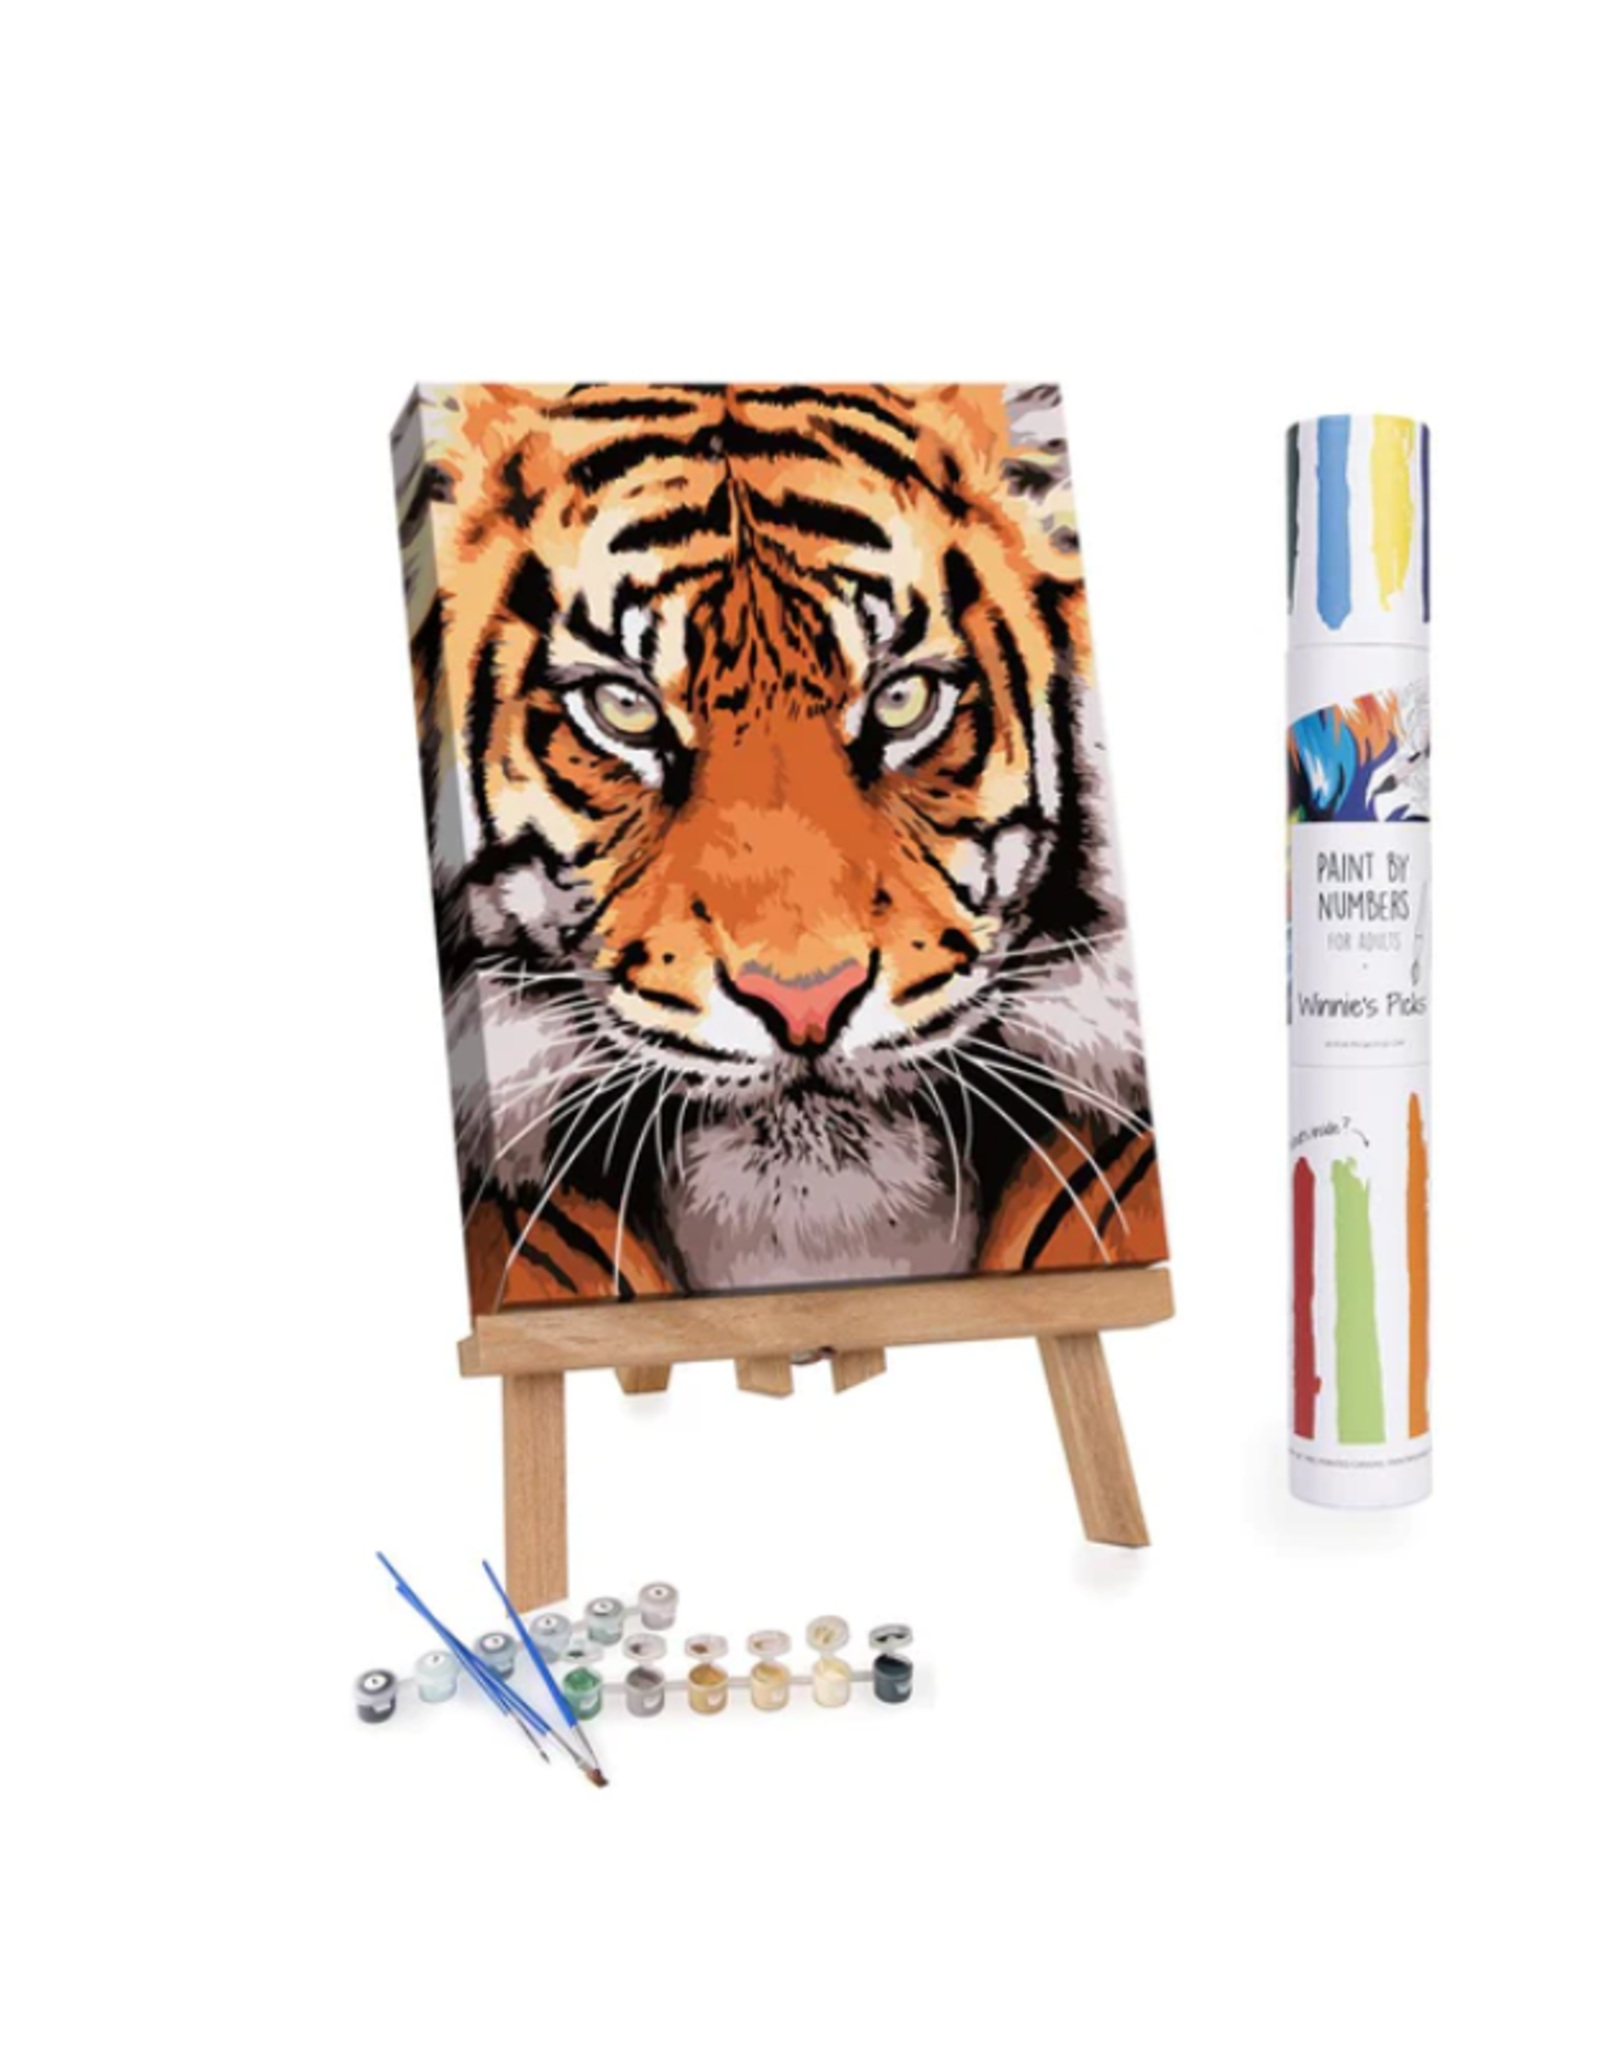 Winnie's Picks Paint by Numbers: Tiger Face - 20x16